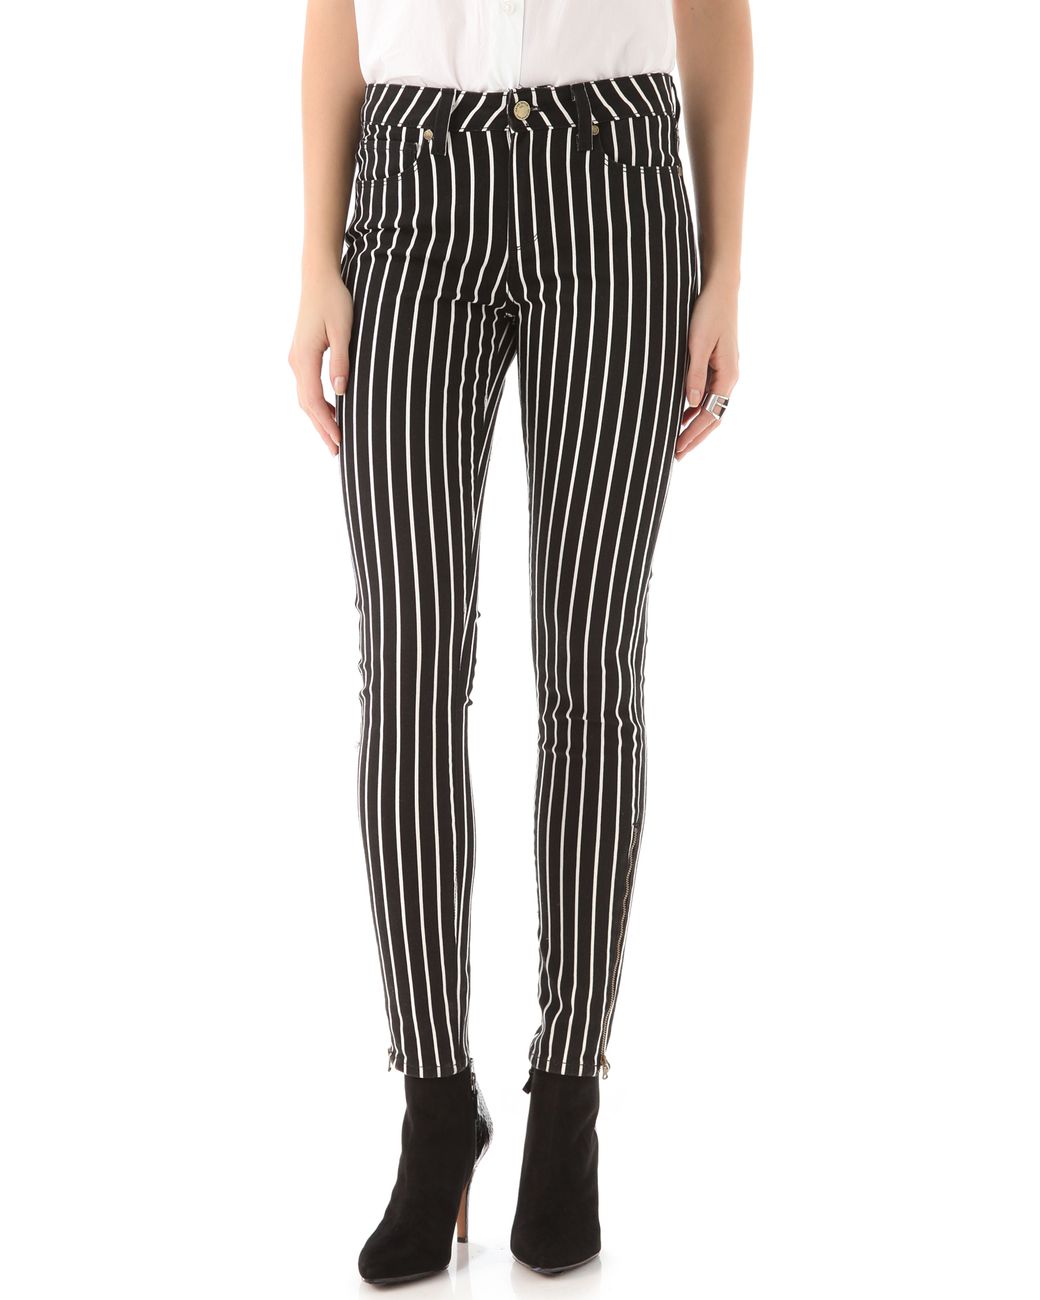 PAIGE Hoxton Striped Skinny Jeans in Black | Lyst